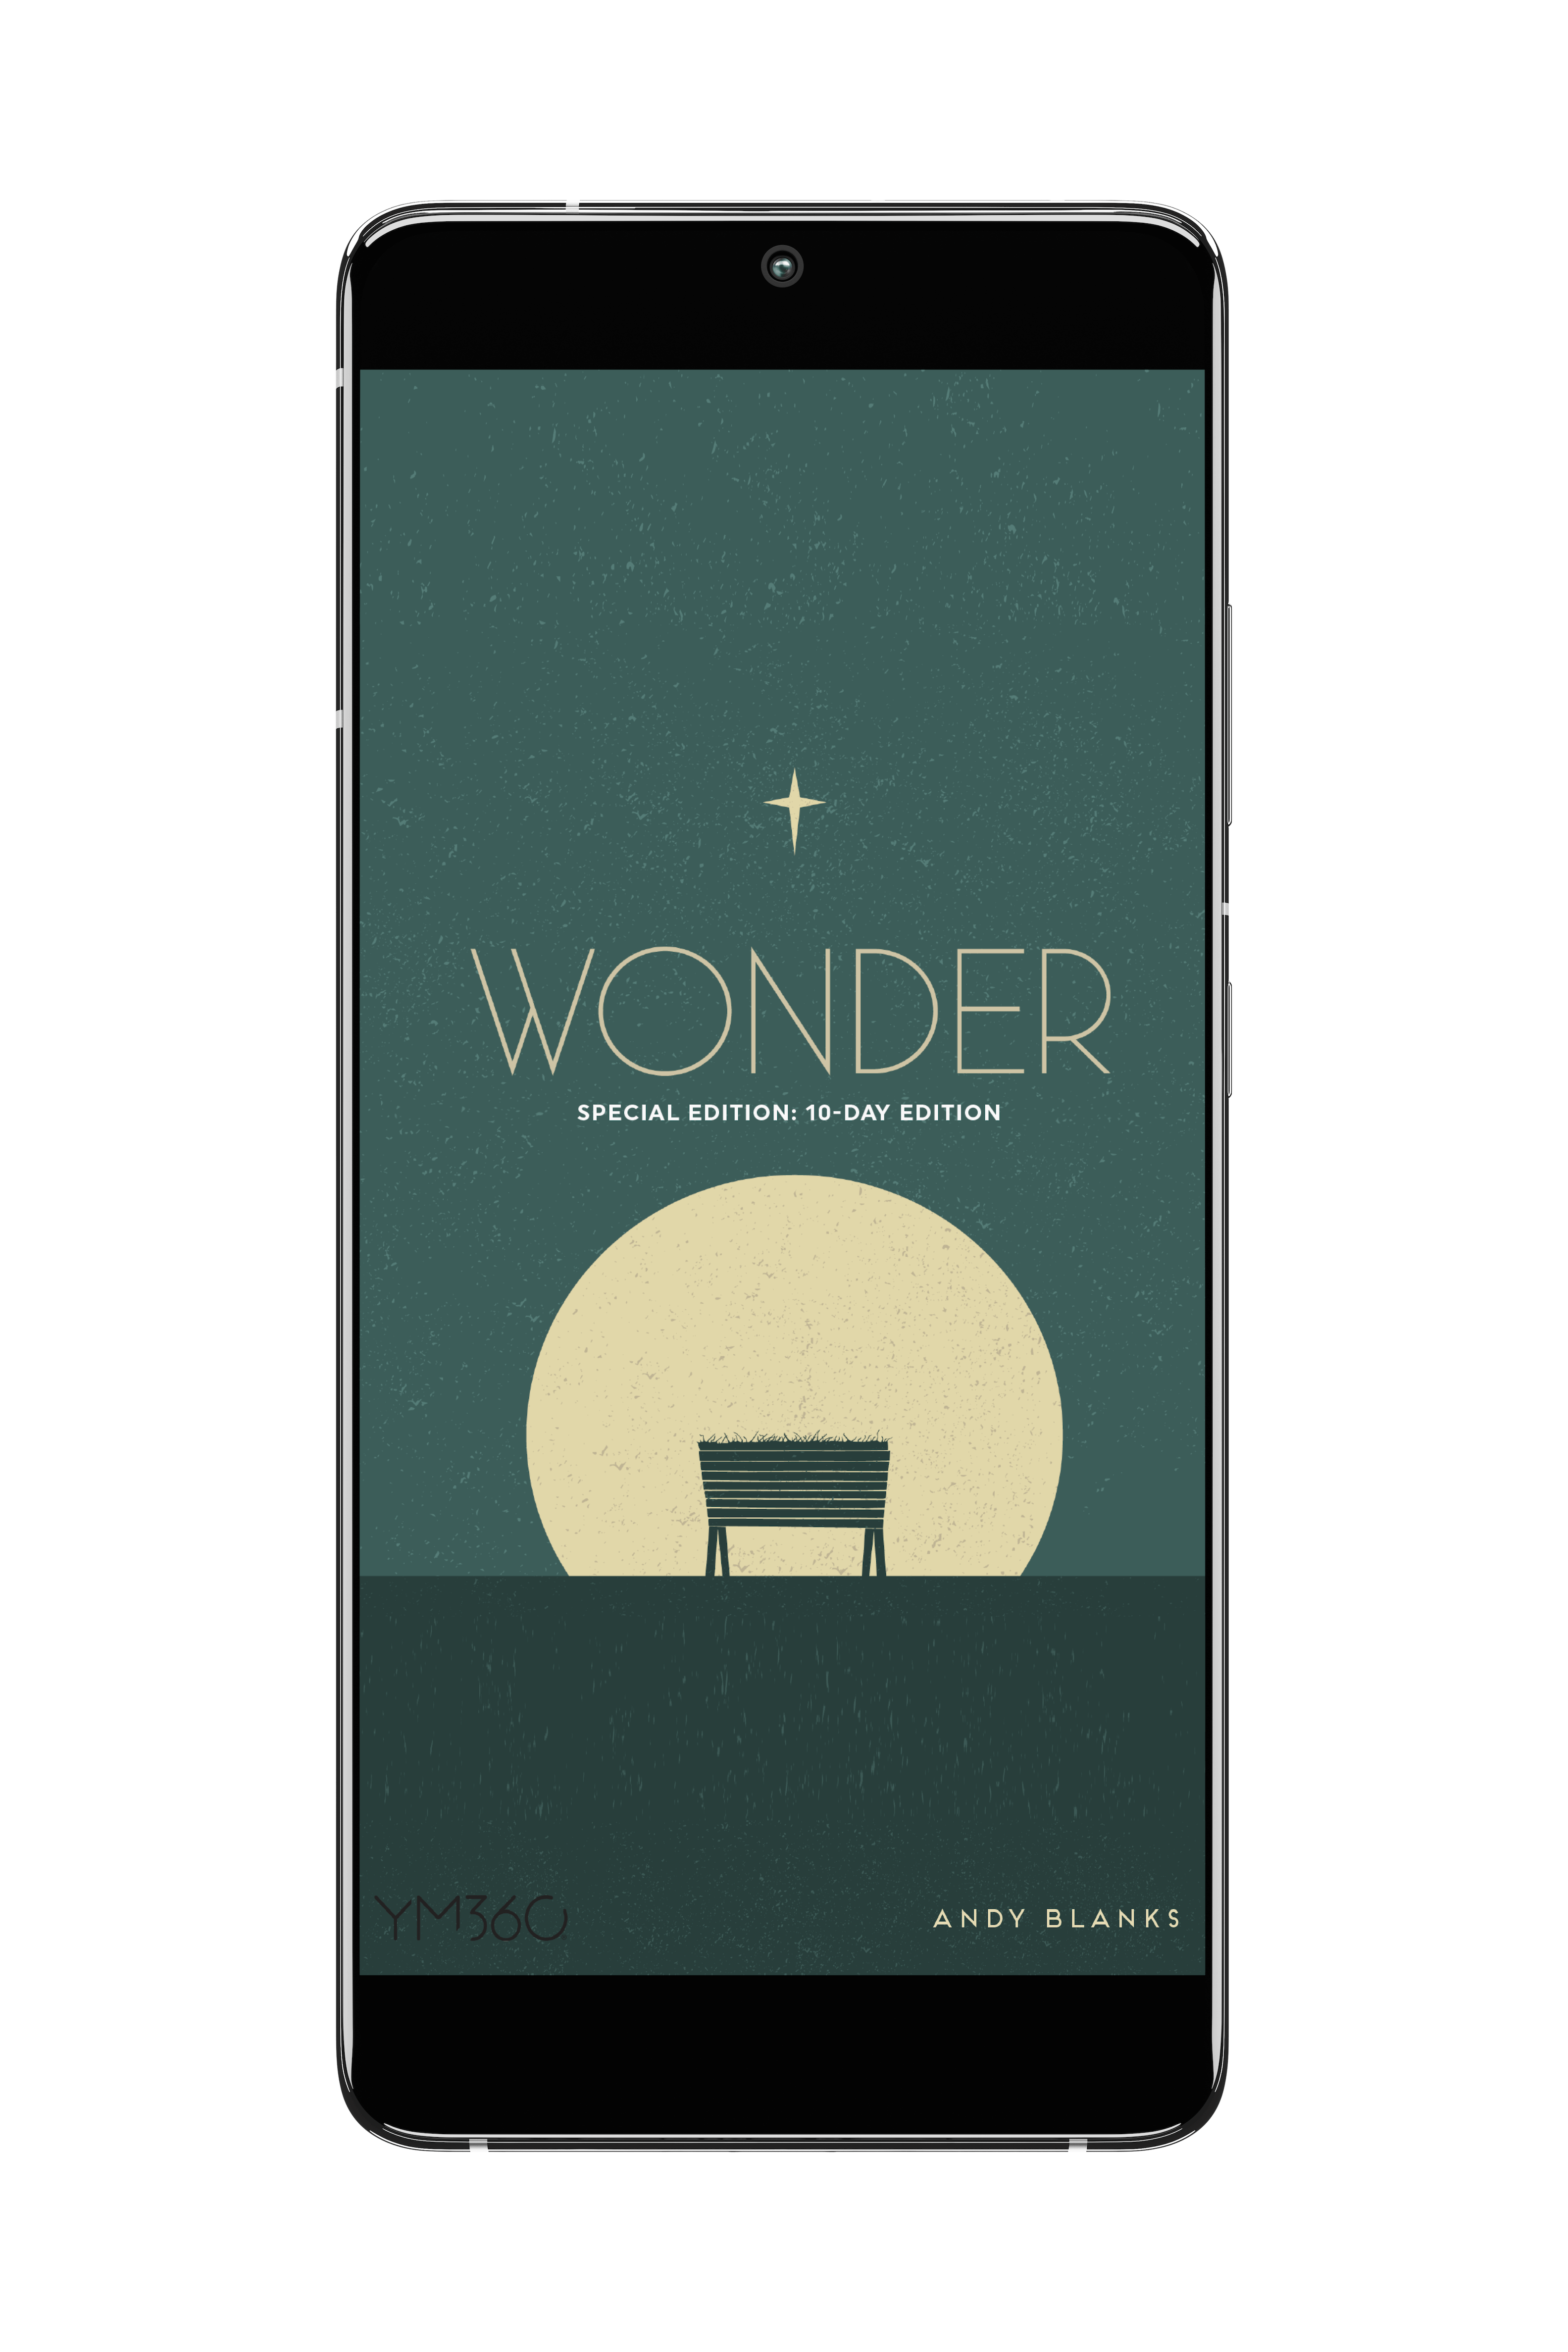 [DOWNLOADABLE 10-DAY EDITION] Wonder: A 10-Day Christmas Devotional for Students